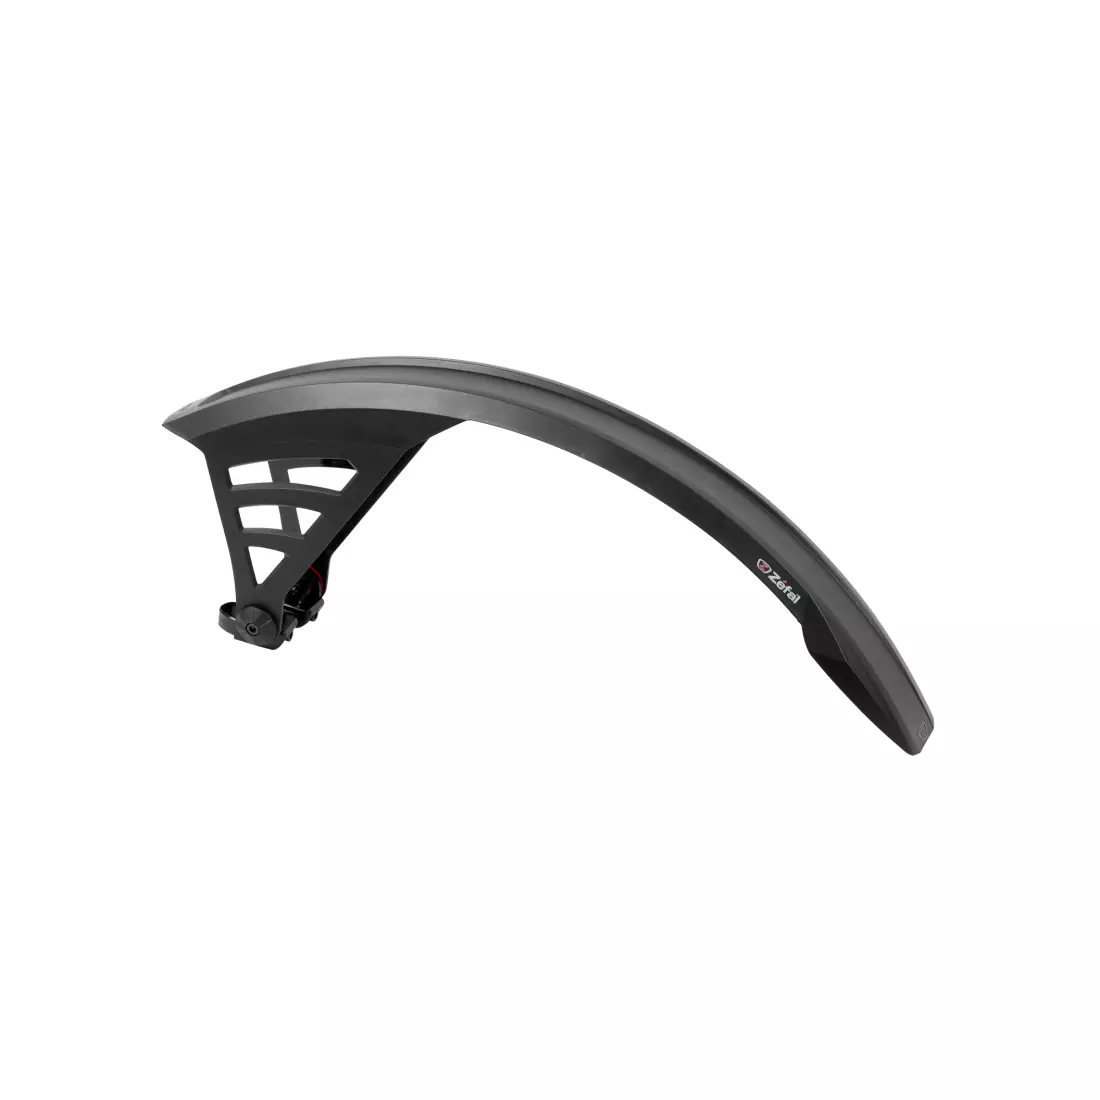 ZEFAL rear bicycle fender deflector rs 75 black ZF-2531